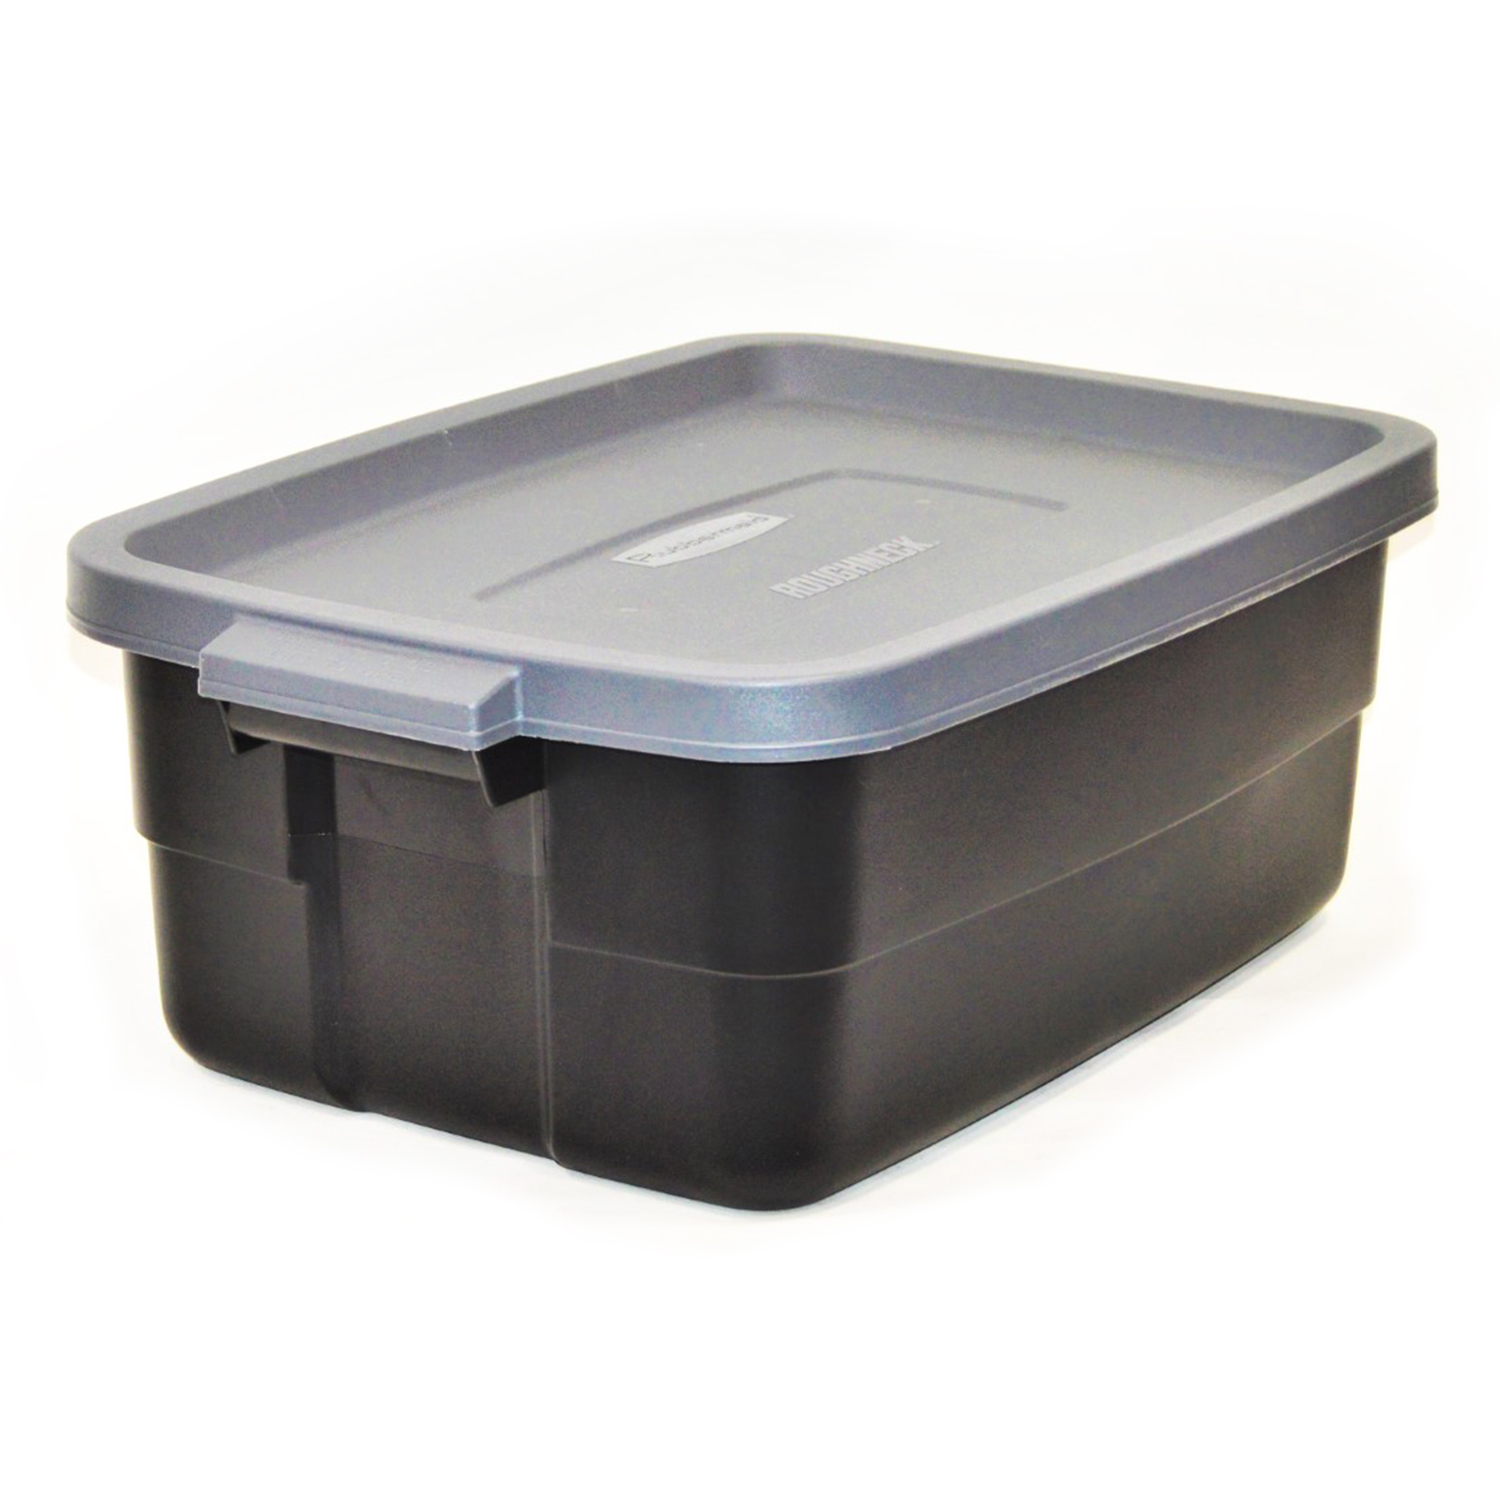 Rubbermaid Roughneck Tote 10 Gal Storage Container, Black/Gray (6 Pack) - image 2 of 7